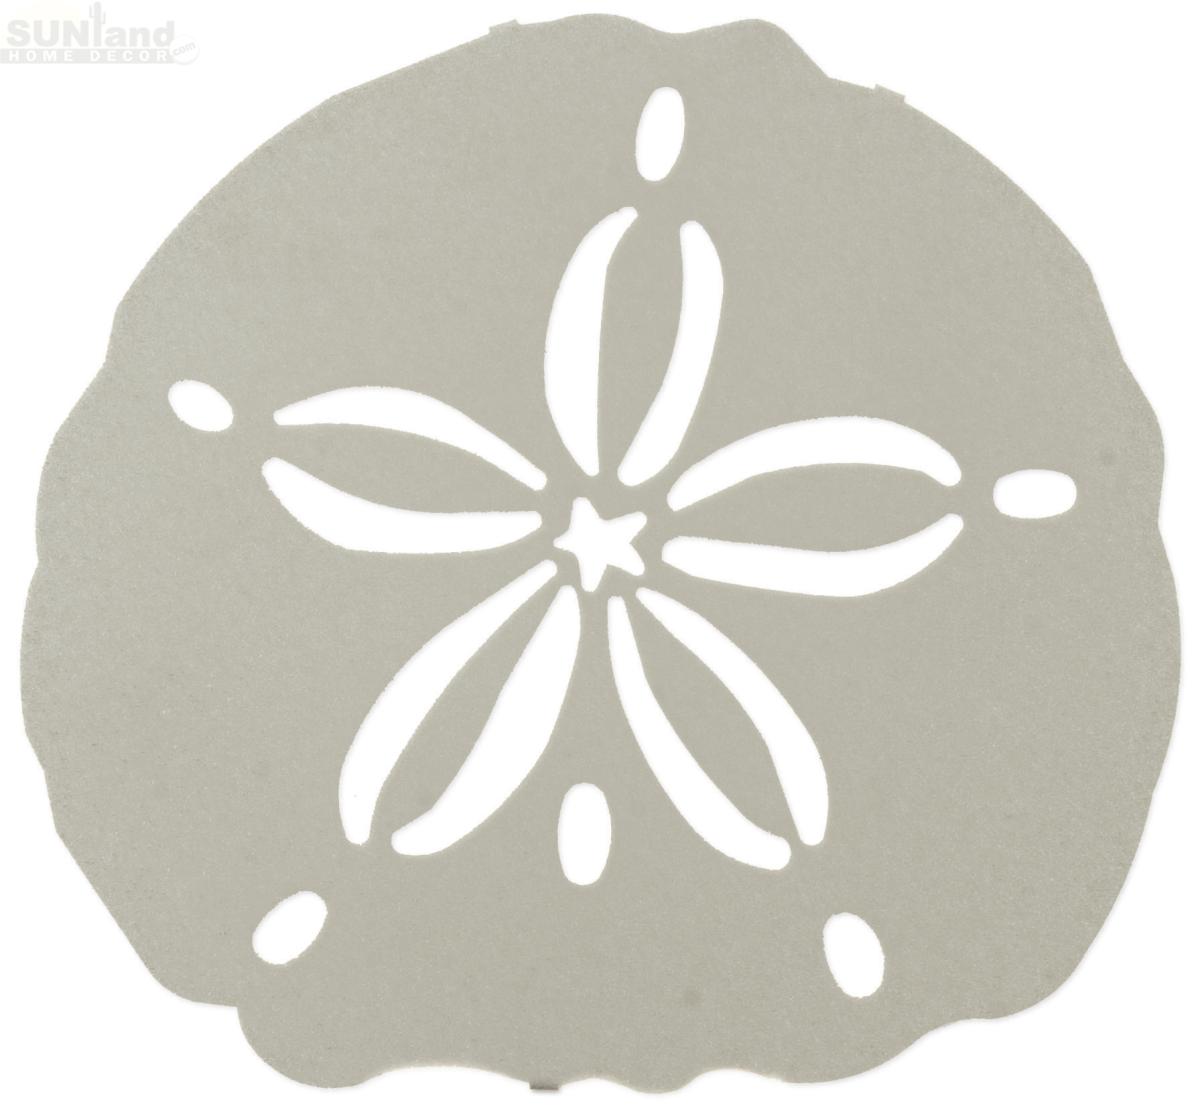 Sand dollar clipart with star in middle die cuts clipartfest